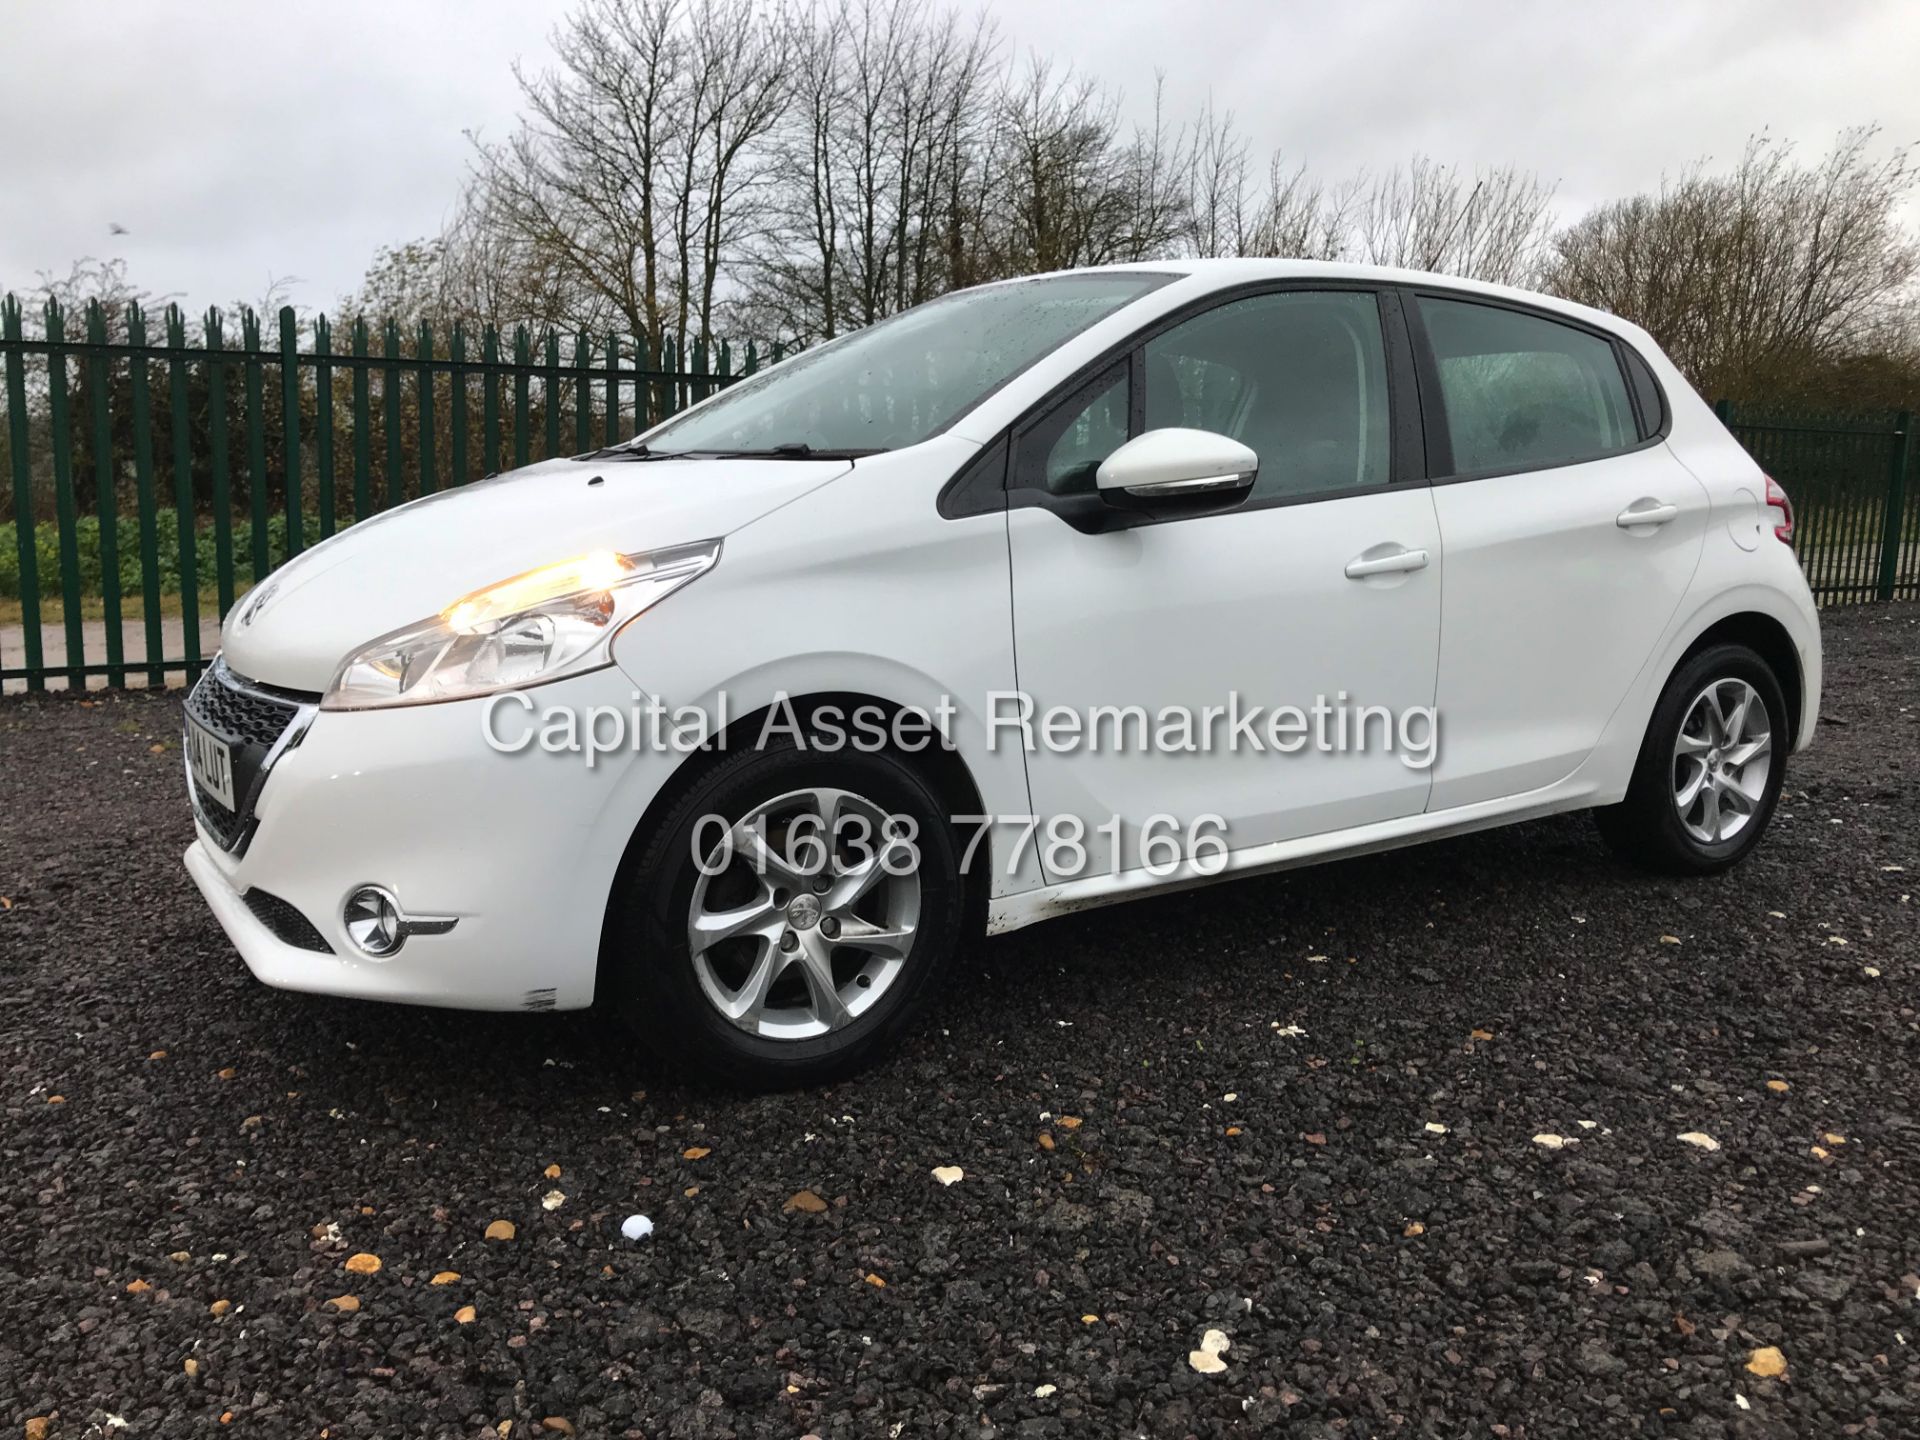 (ON SALE) PEUGEOT 208 1.4HDI "ACTIVE" 1 PREVIOUS KEEPER FSH (14 REG) RECENT SERVICE-AIR CON *NO VAT* - Image 5 of 23